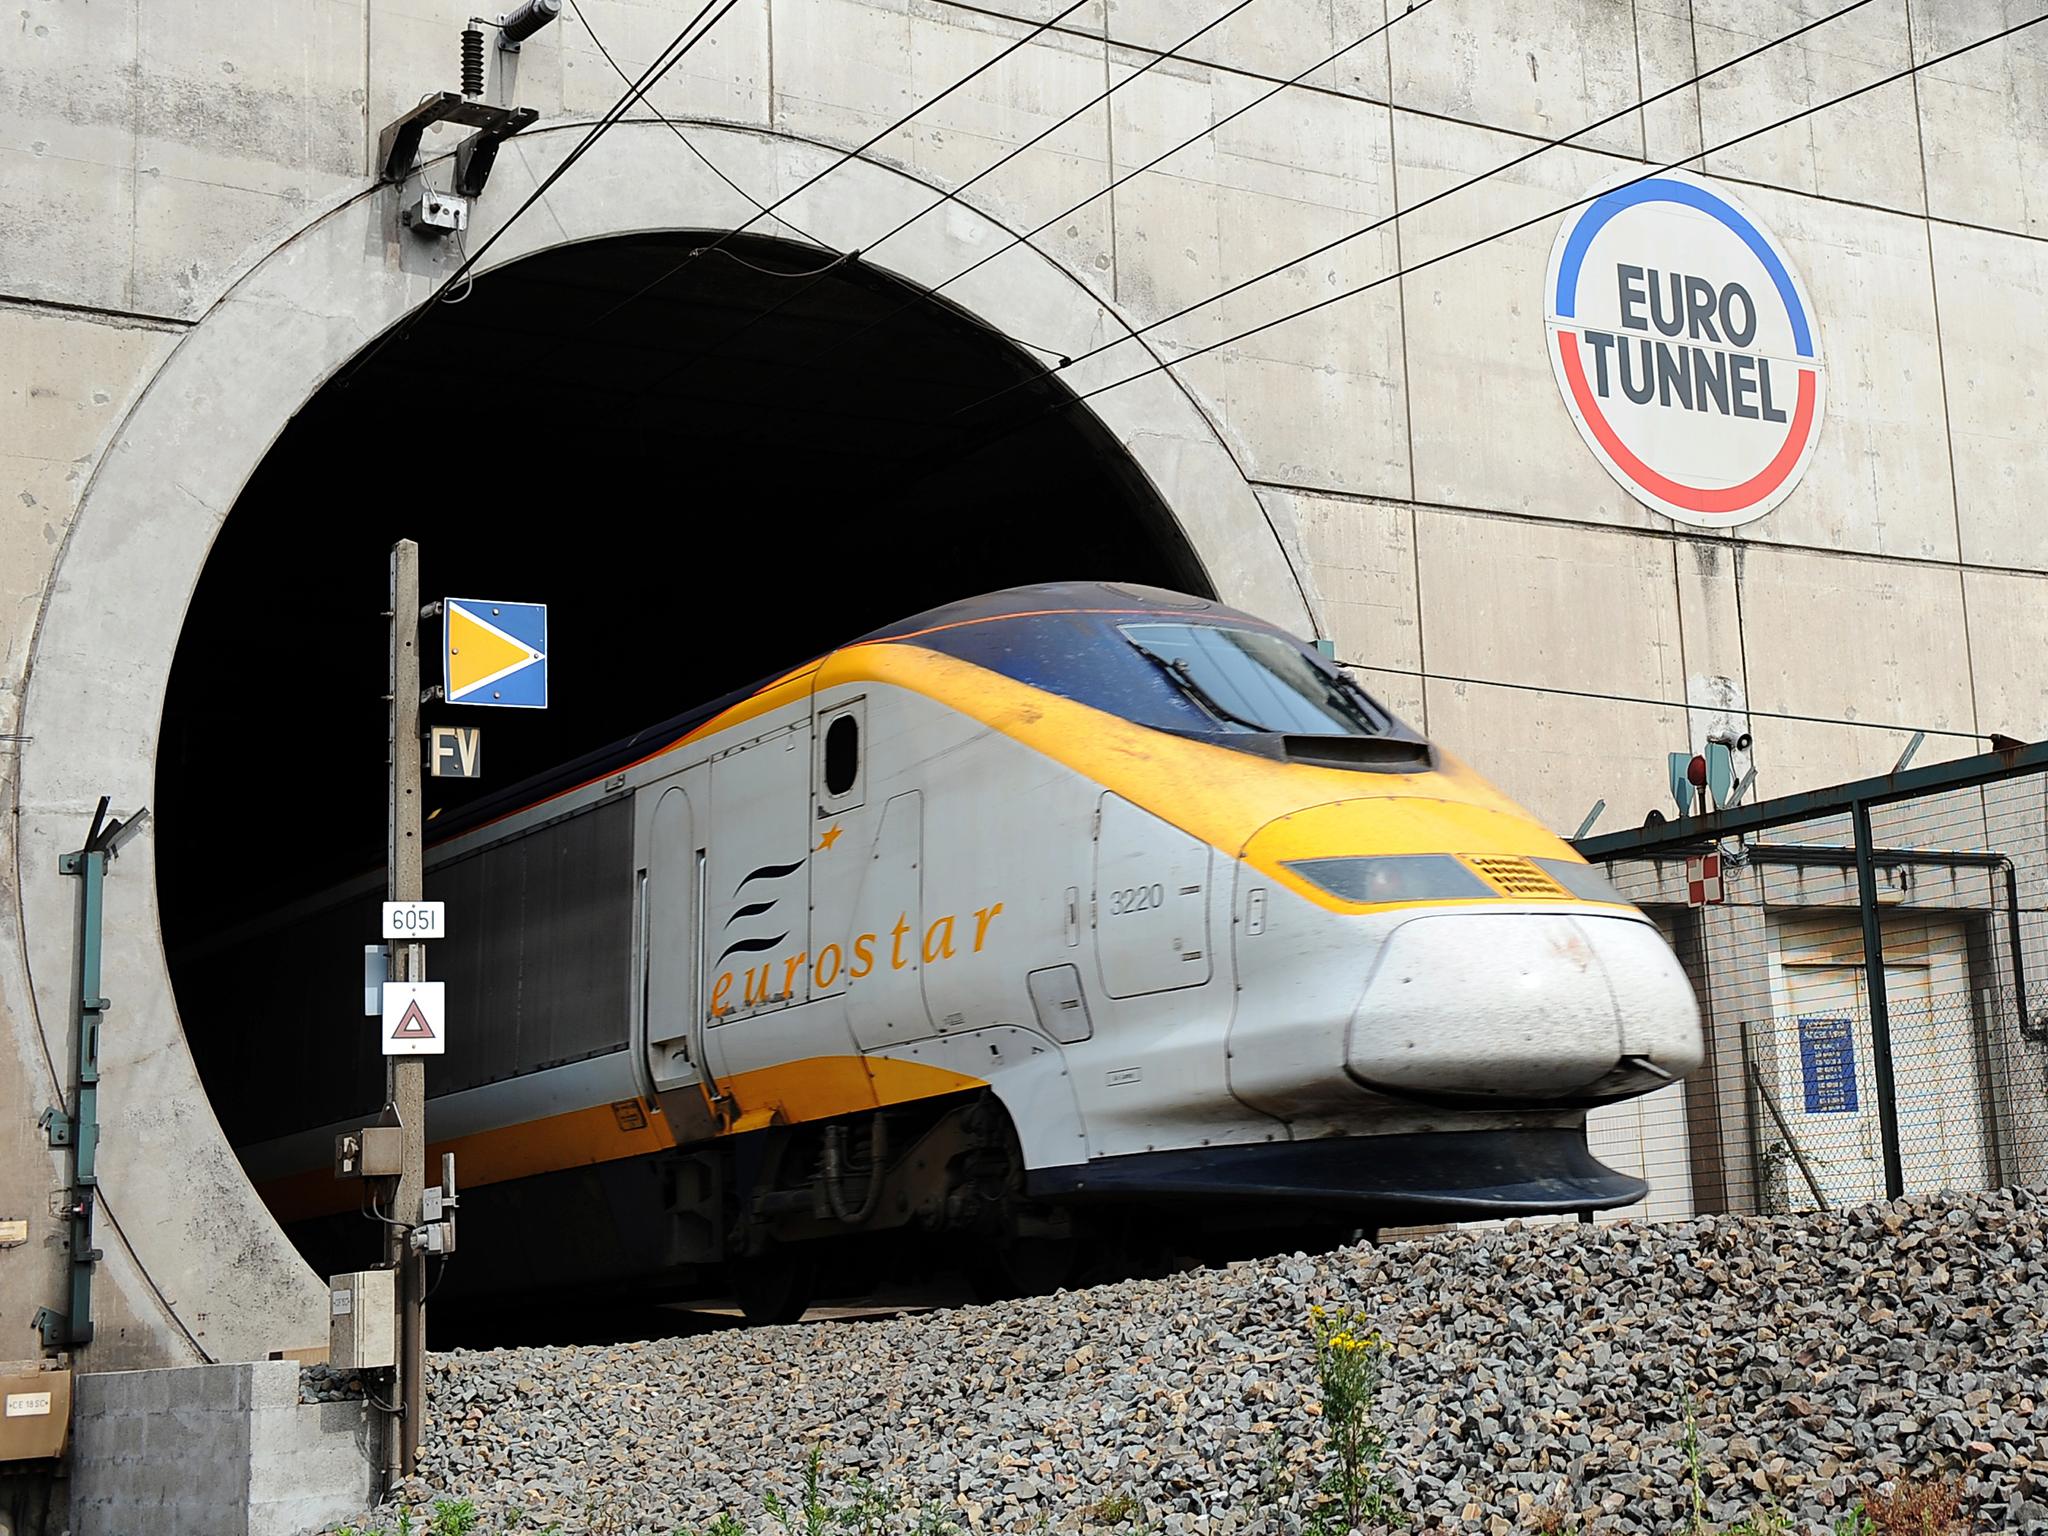 eurotunnel share price today